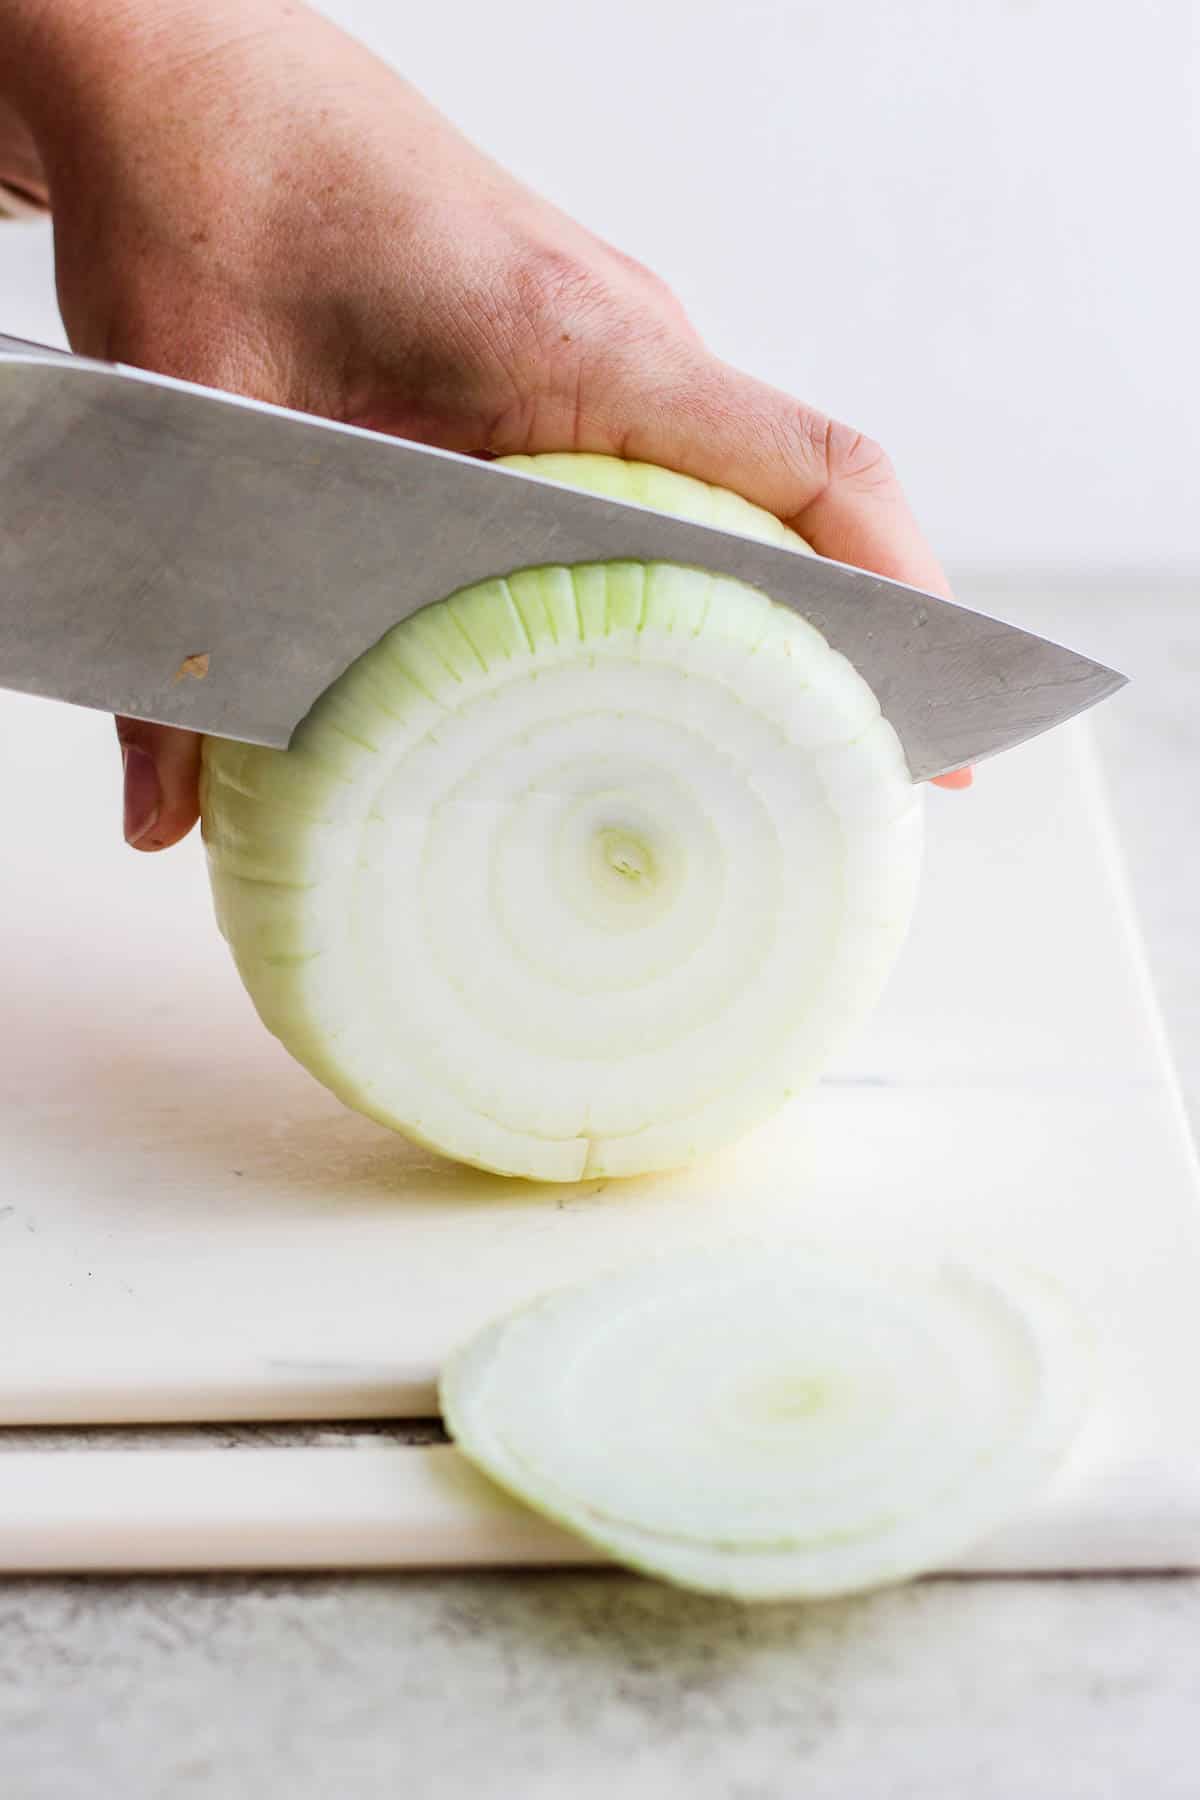 A large onion being cut into slices.